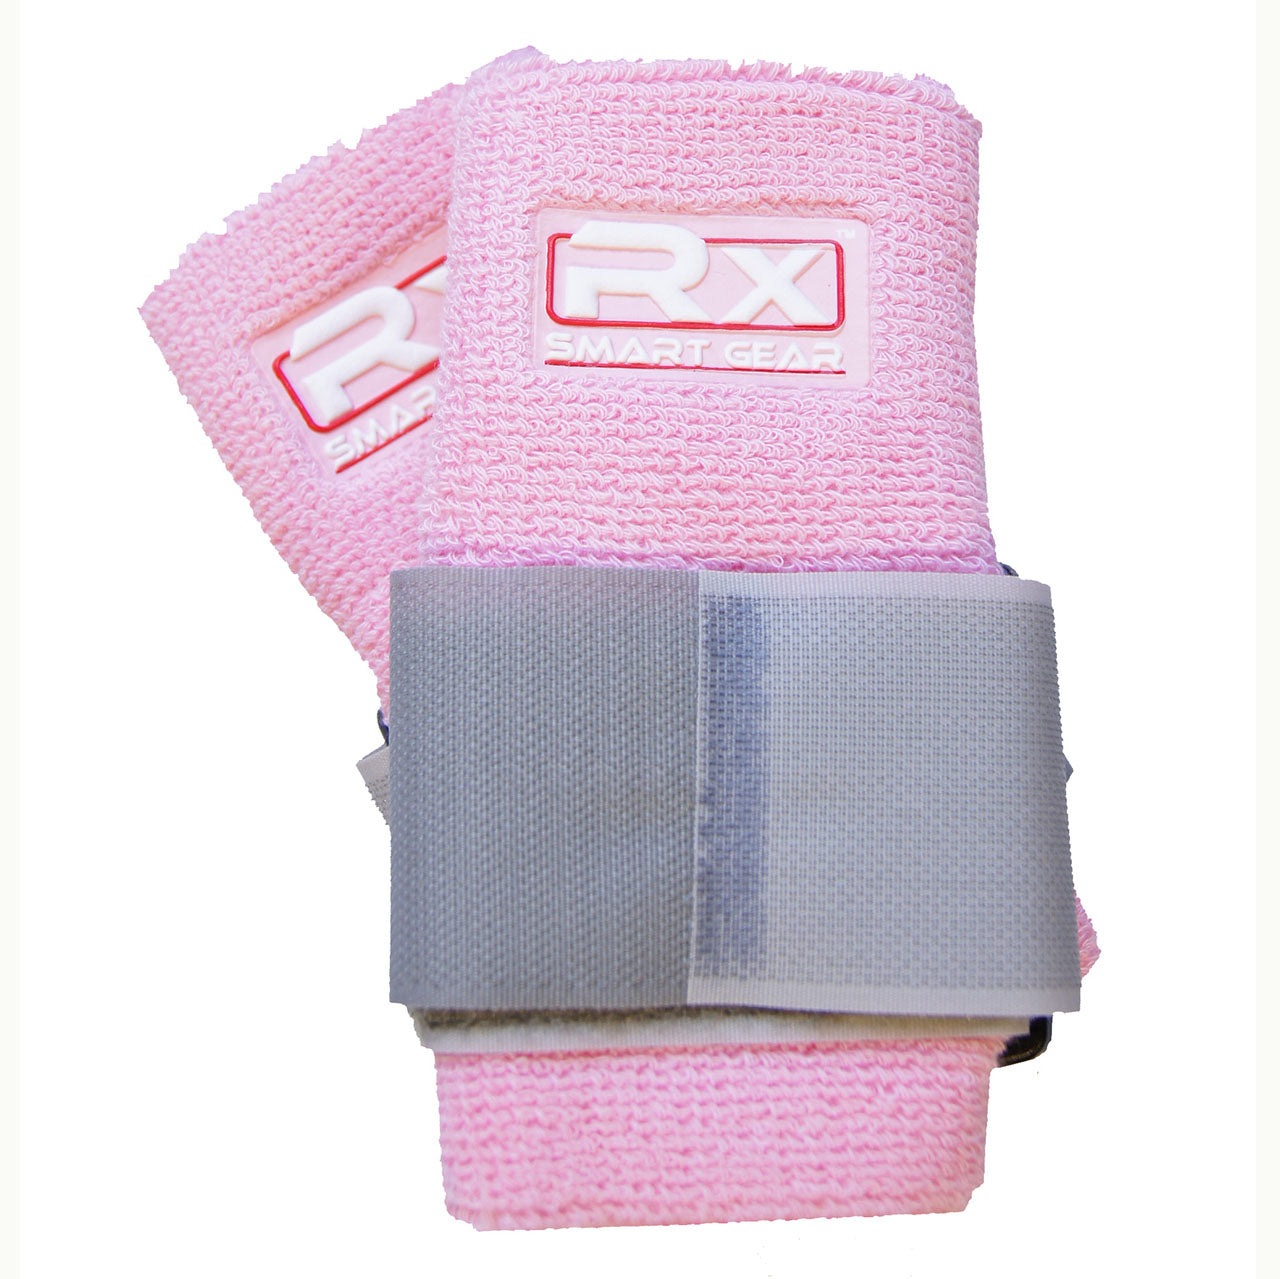 Rx Wrist Support Pink Small